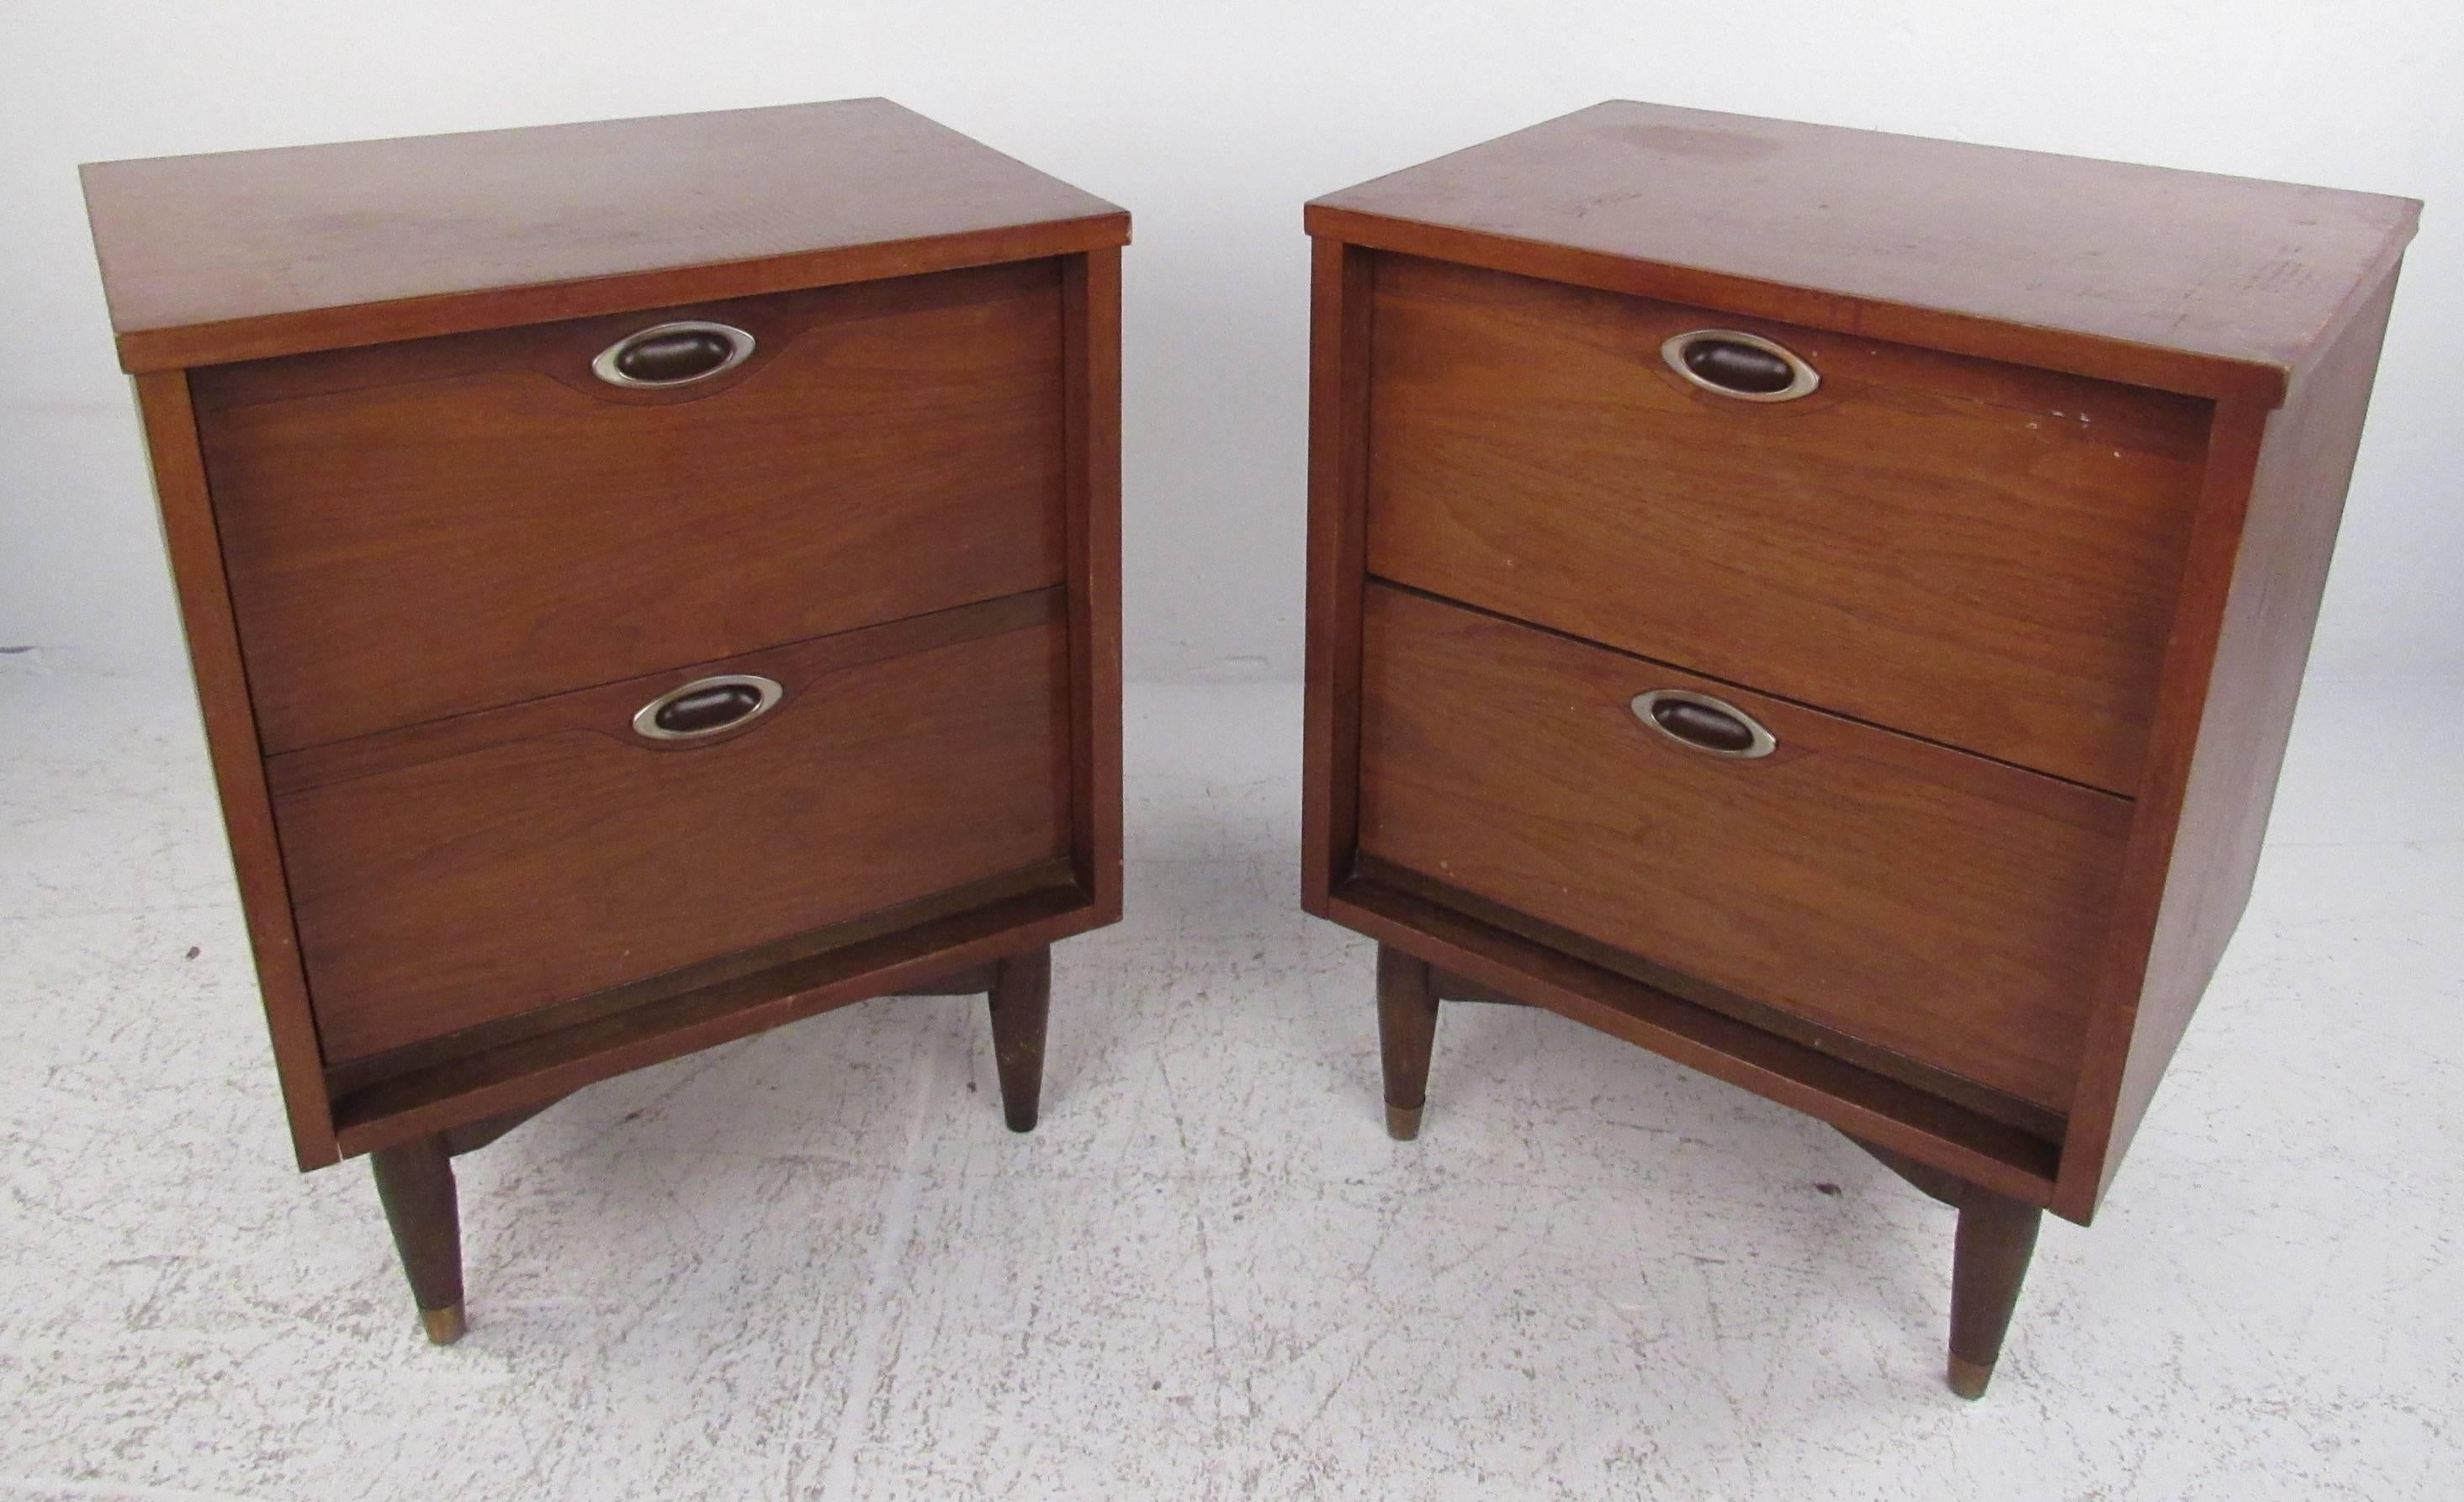 Pair of two-drawer walnut nightstands with recessed pulls and tapered legs from the 